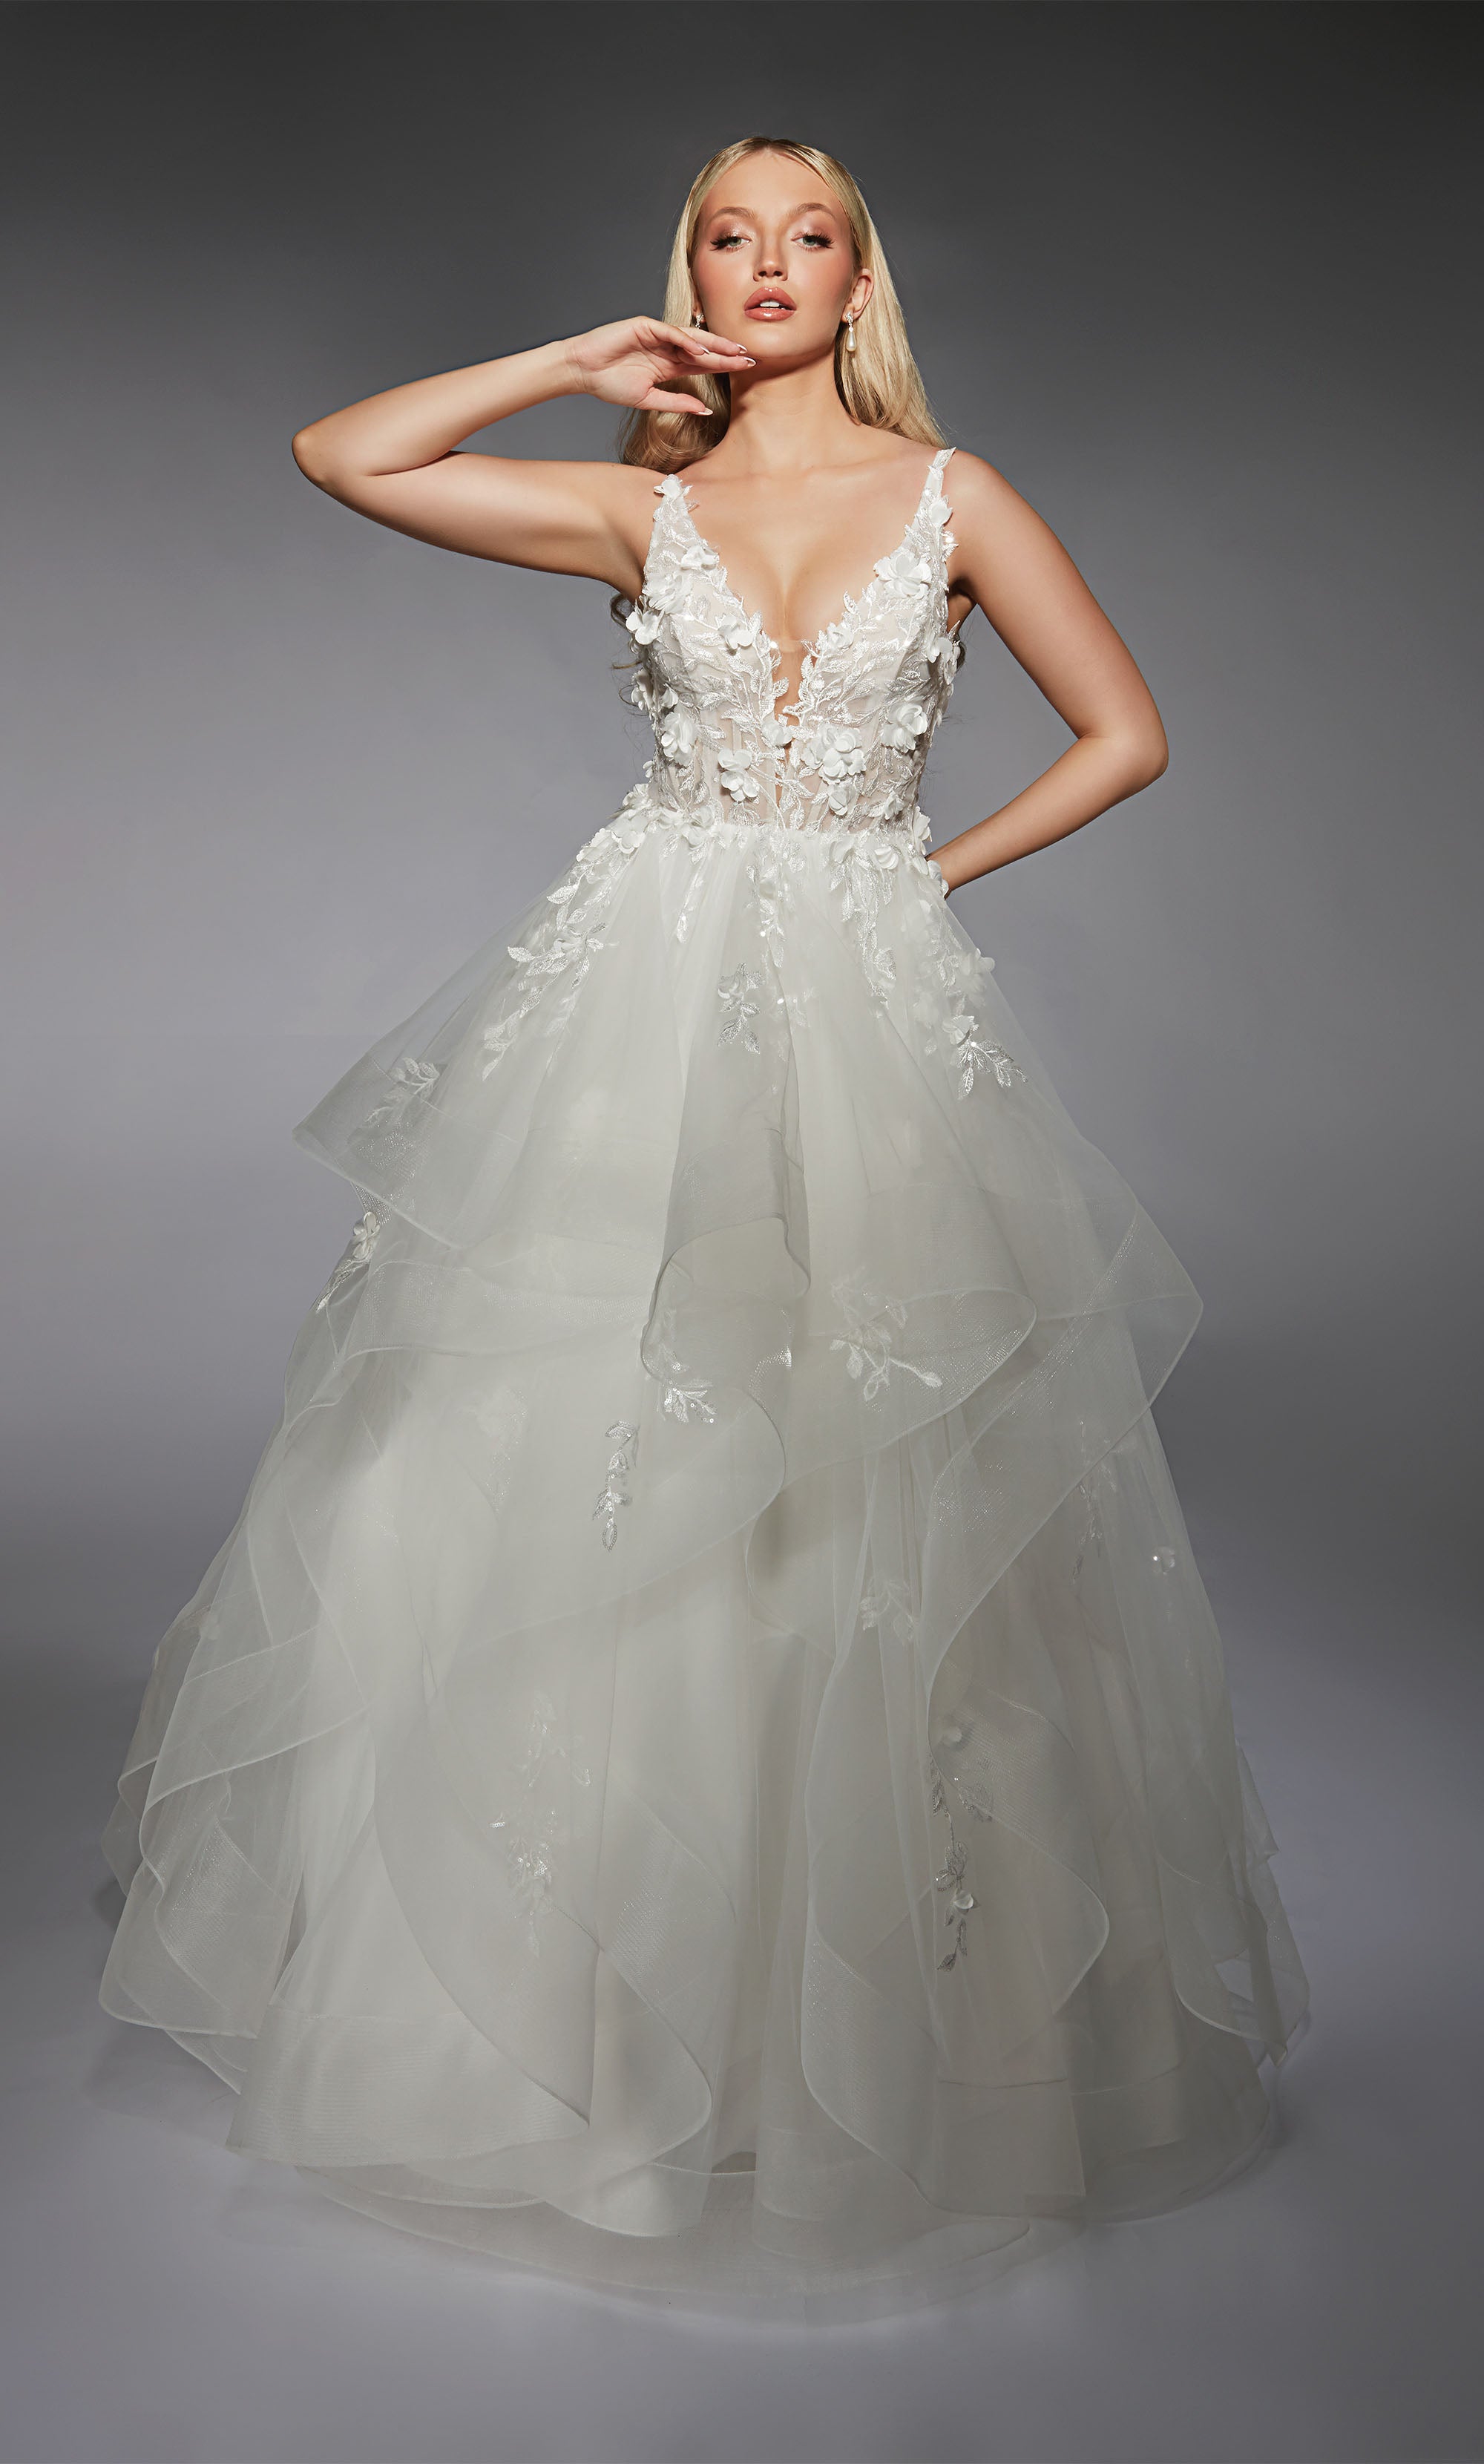 Formal Dress: 7131. Long, Plunging Neckline, Ball Gown | Alyce Paris